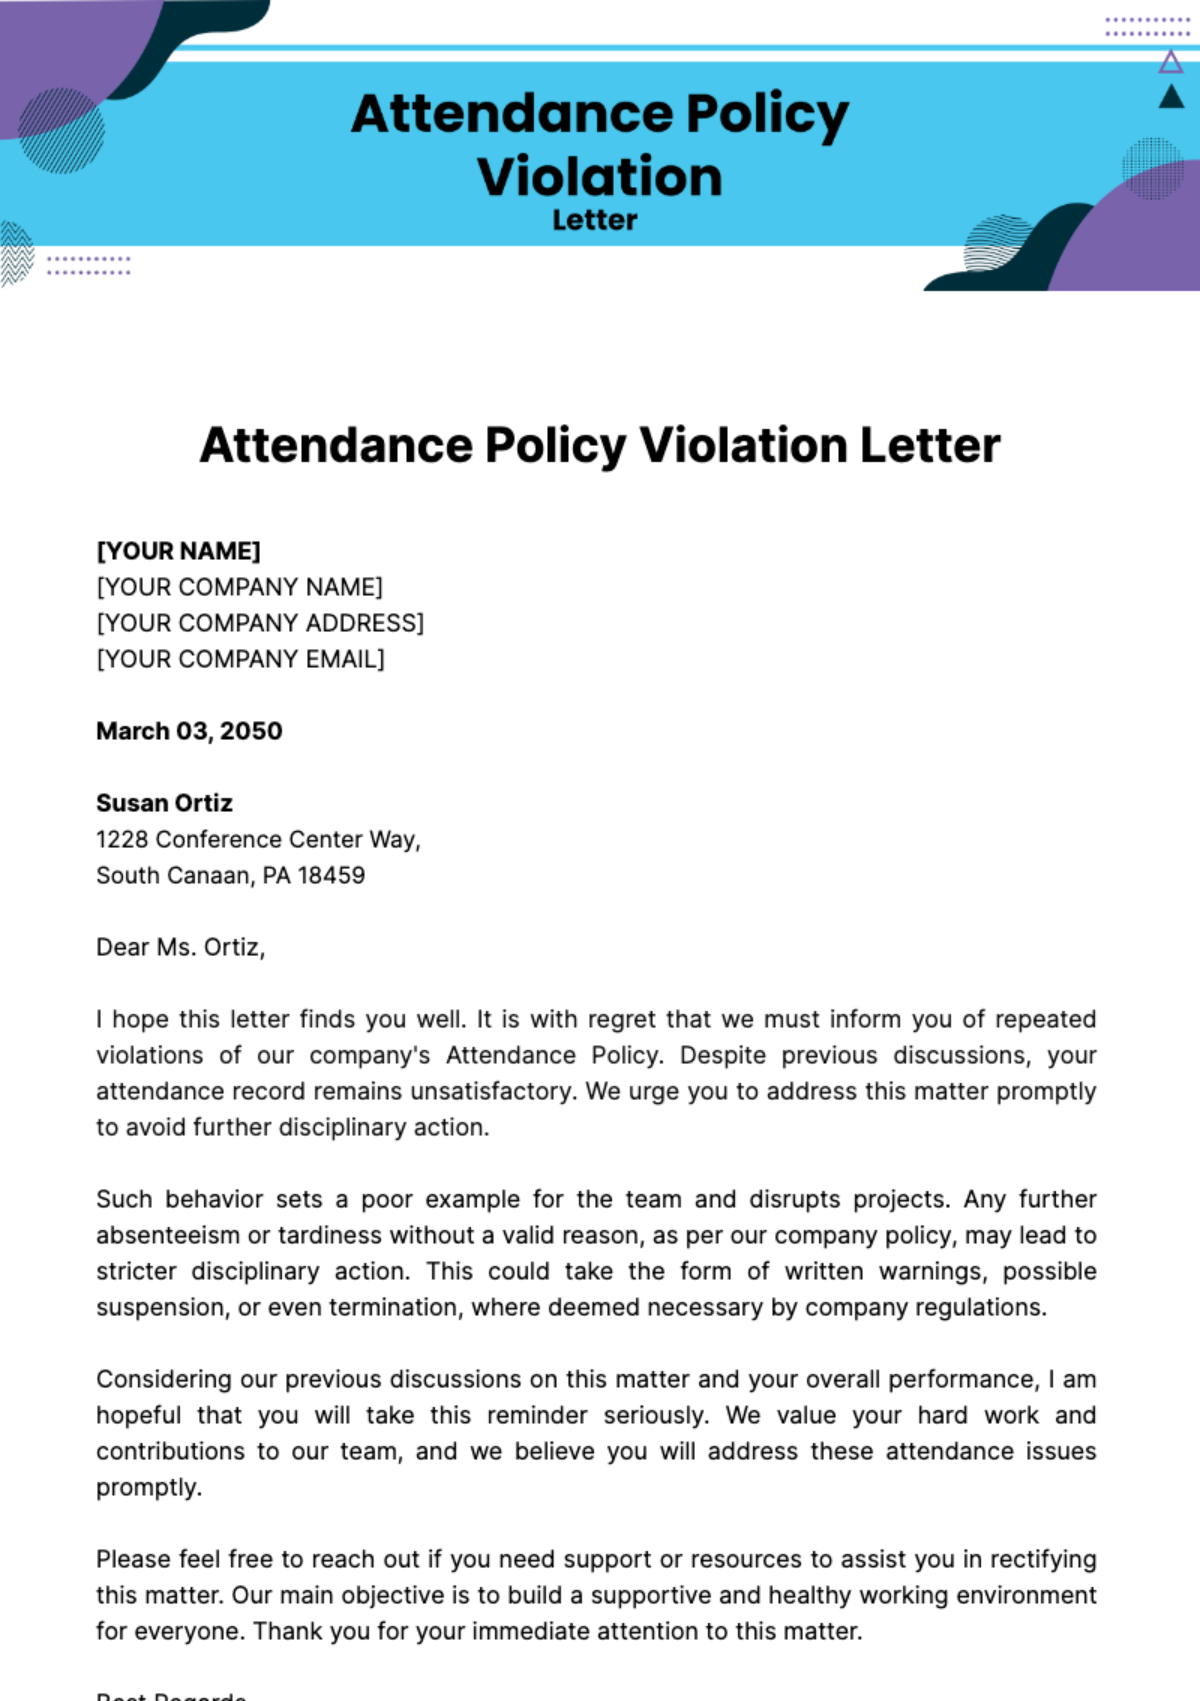 Attendance Policy Violation Letter Template